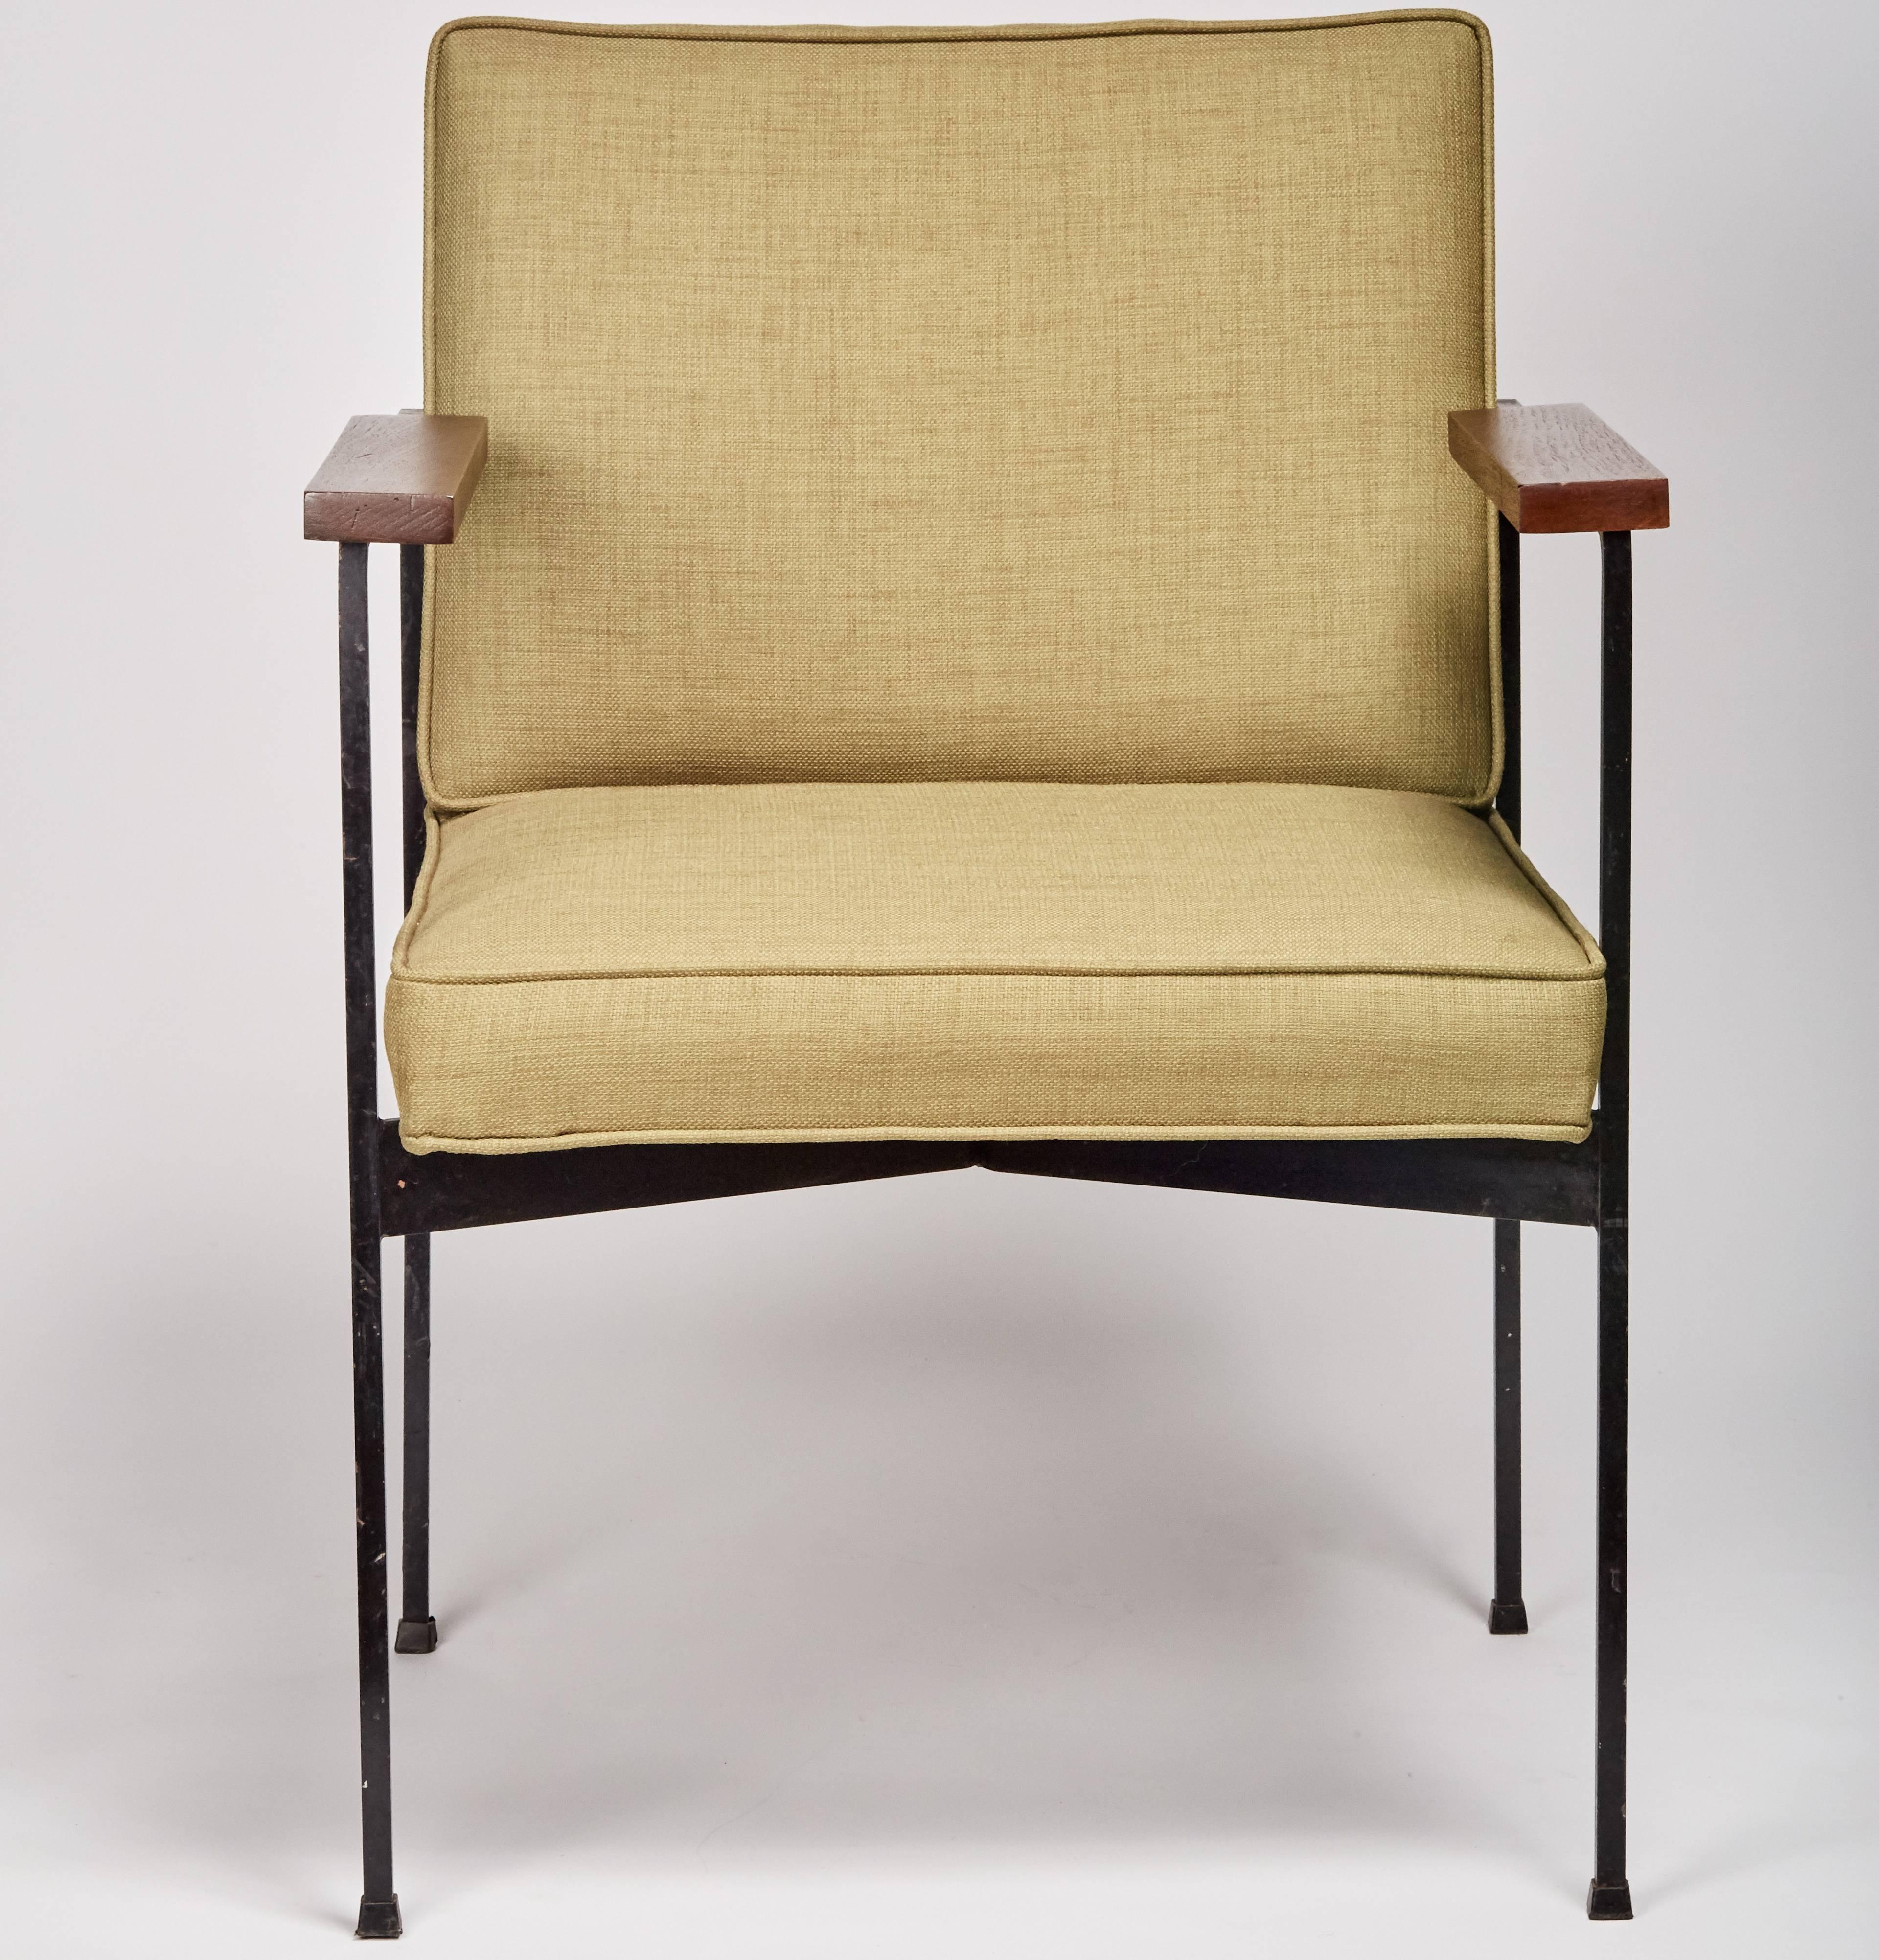 Mid-Century Modern, armchair by Pacific Iron attributed to Milo Baughman features solid walnut armrests and newly upholstery in light green cotton linen blend.